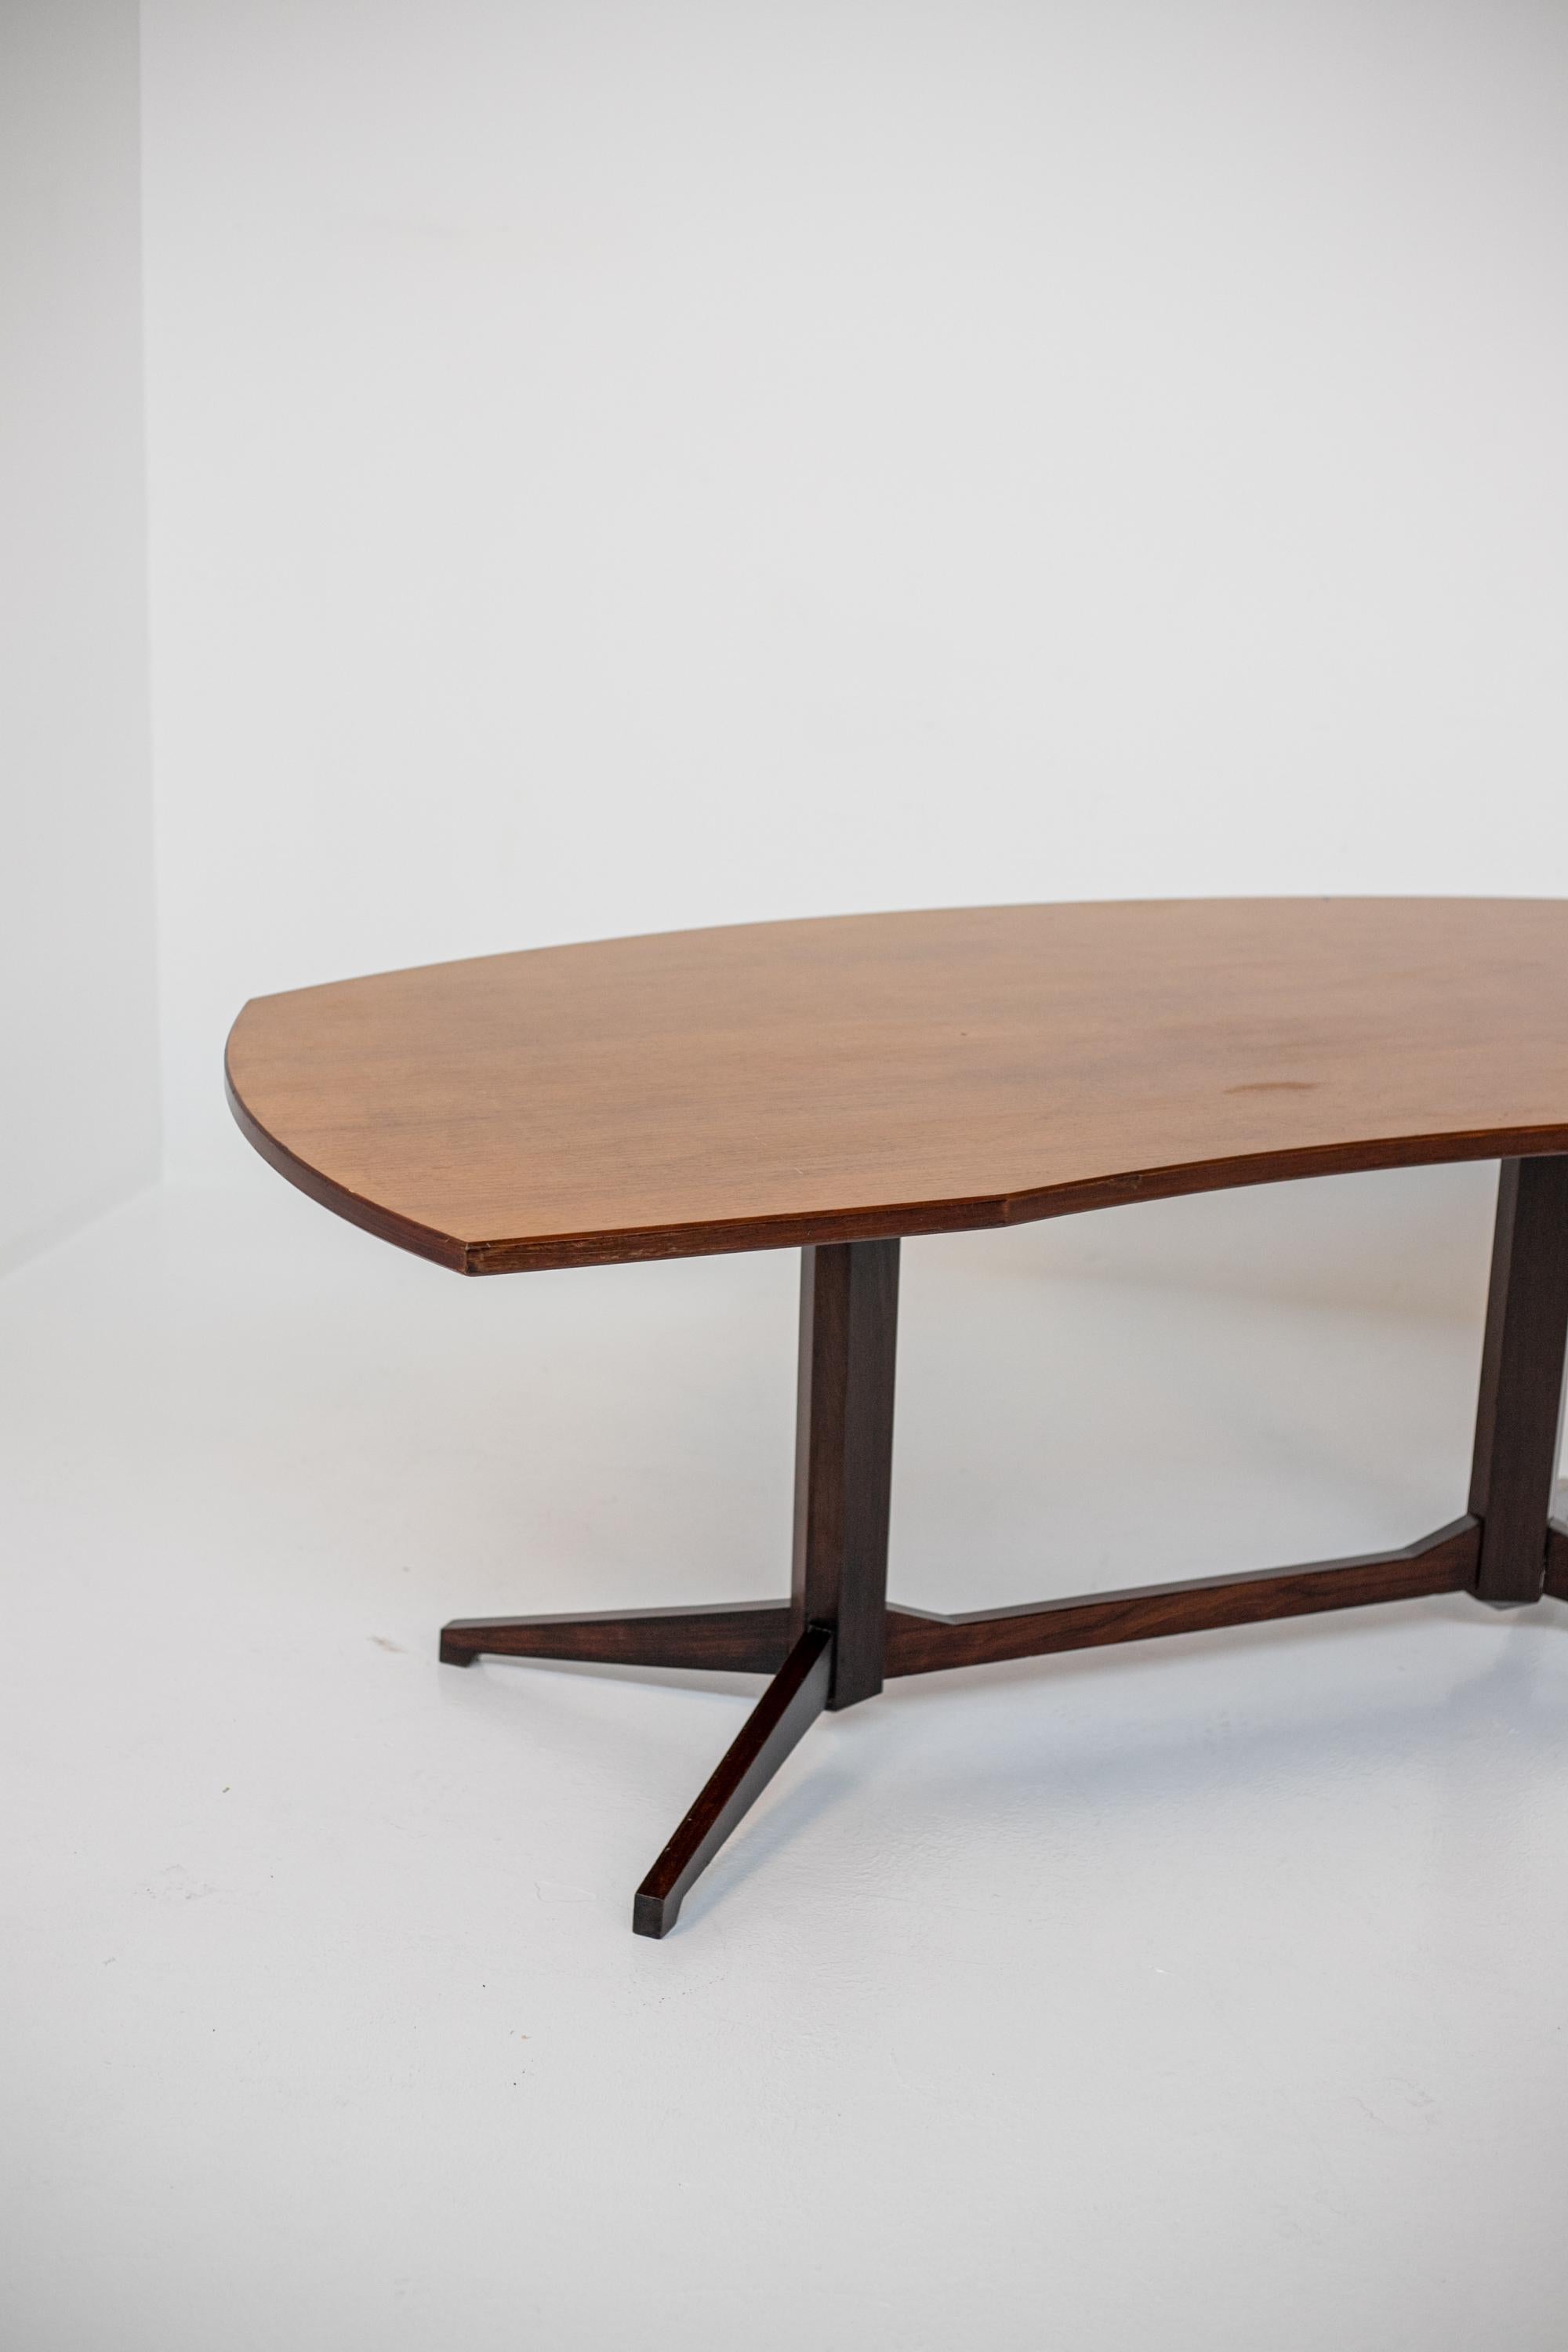 Rare table made by Franco Albini for the Poggi manufactory in the 1950s. 
The table is totally made of wood. The peculiarity of the table is its rectangular shaped top with one side shaped like a half moon. The legs are beautifully crafted in a